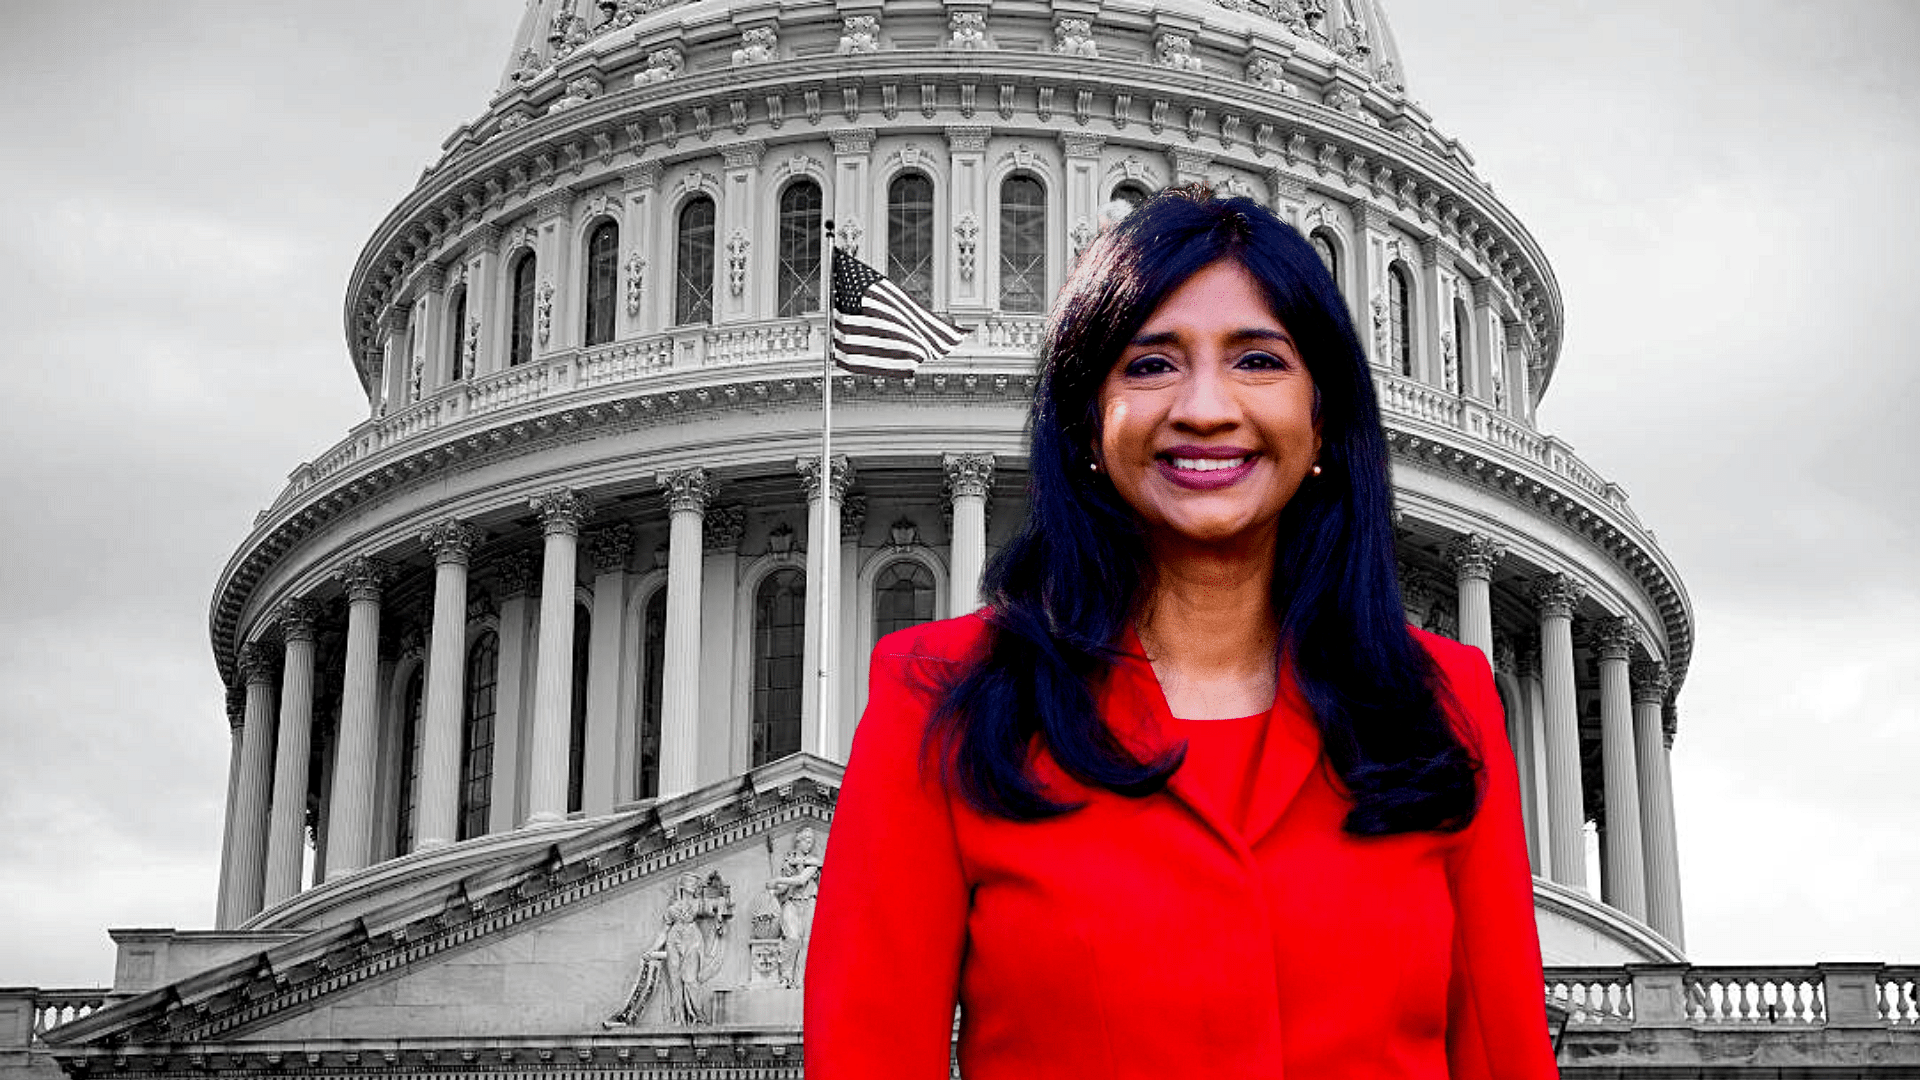 <div class="paragraphs"><p><a href="https://www.thequint.com/us-nri-news/indian-american-aruna-miller-most-likely-to-become-the-next-lieutenant-governor-of-maryland">Aruna Miller</a> made history after she became the first <a href="https://www.thequint.com/us-nri-news/vijaya-gadde-twitter-legal-chief-fired-by-elon-musk-who-is-she">Indian-American</a> politician to win the lieutenant governor race in Maryland.</p></div>